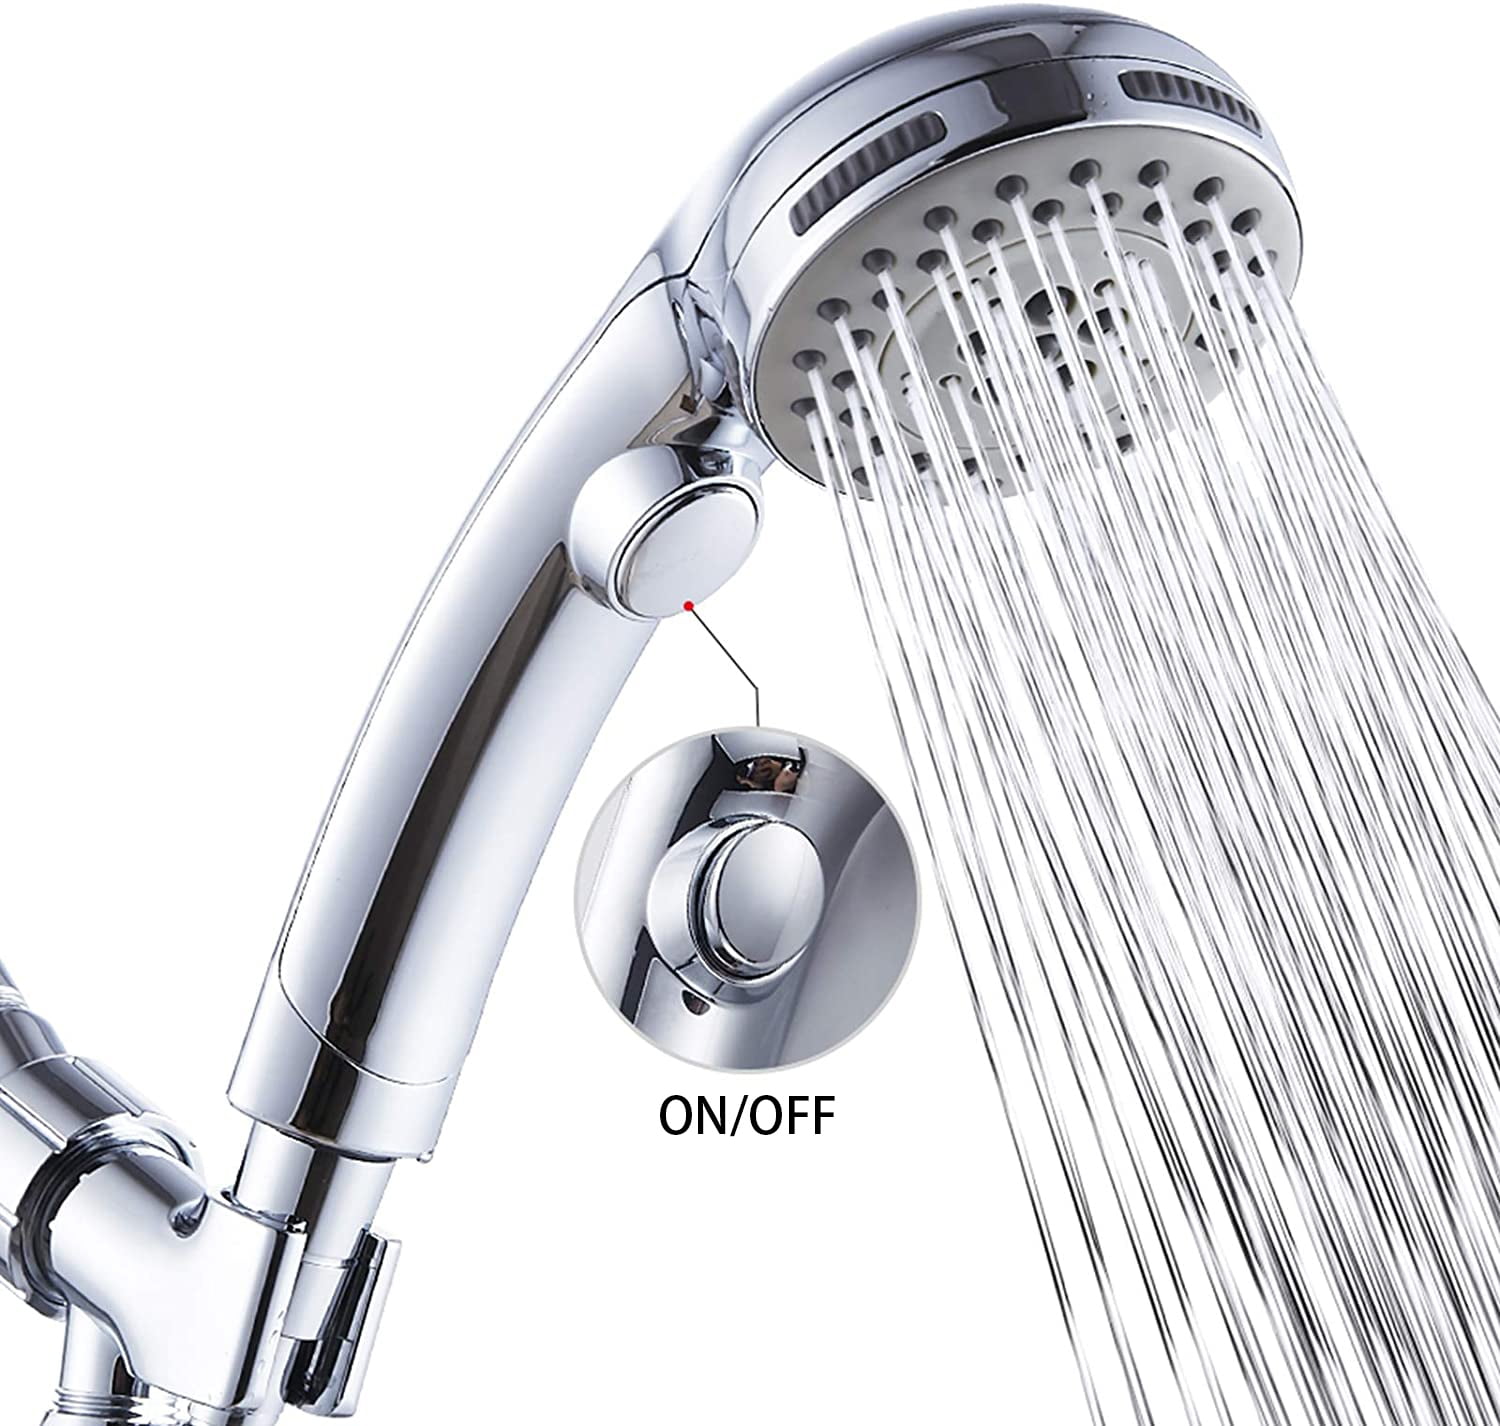 Detachable Water Saving Flow Restrictor Awelife Handheld Shower Head with Hose 60 Extra Long Hose and Adjustable Holder 4.3 Rain Shower Head High Pressure with 6-Spray Settings Luxury Chrome 